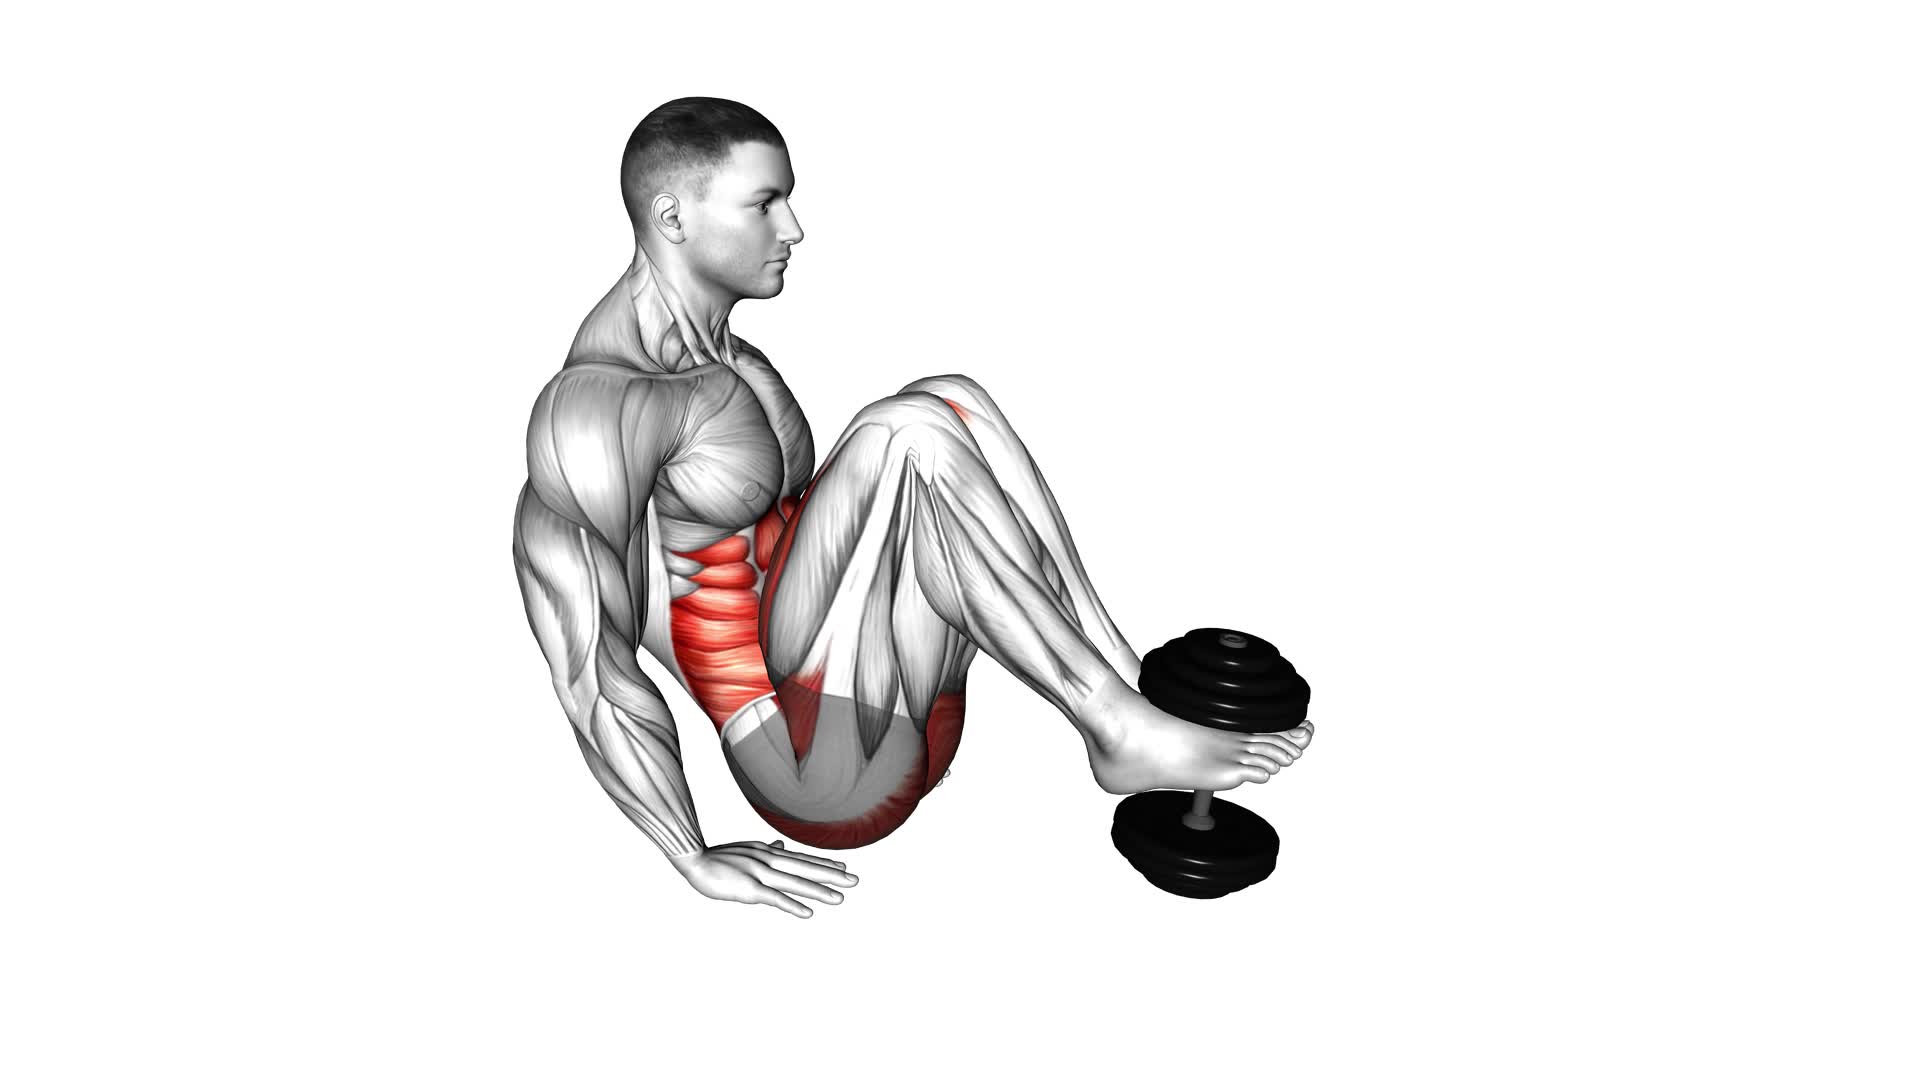 Weighted Seated Tuck Crunch on Floor - Video Exercise Guide & Tips